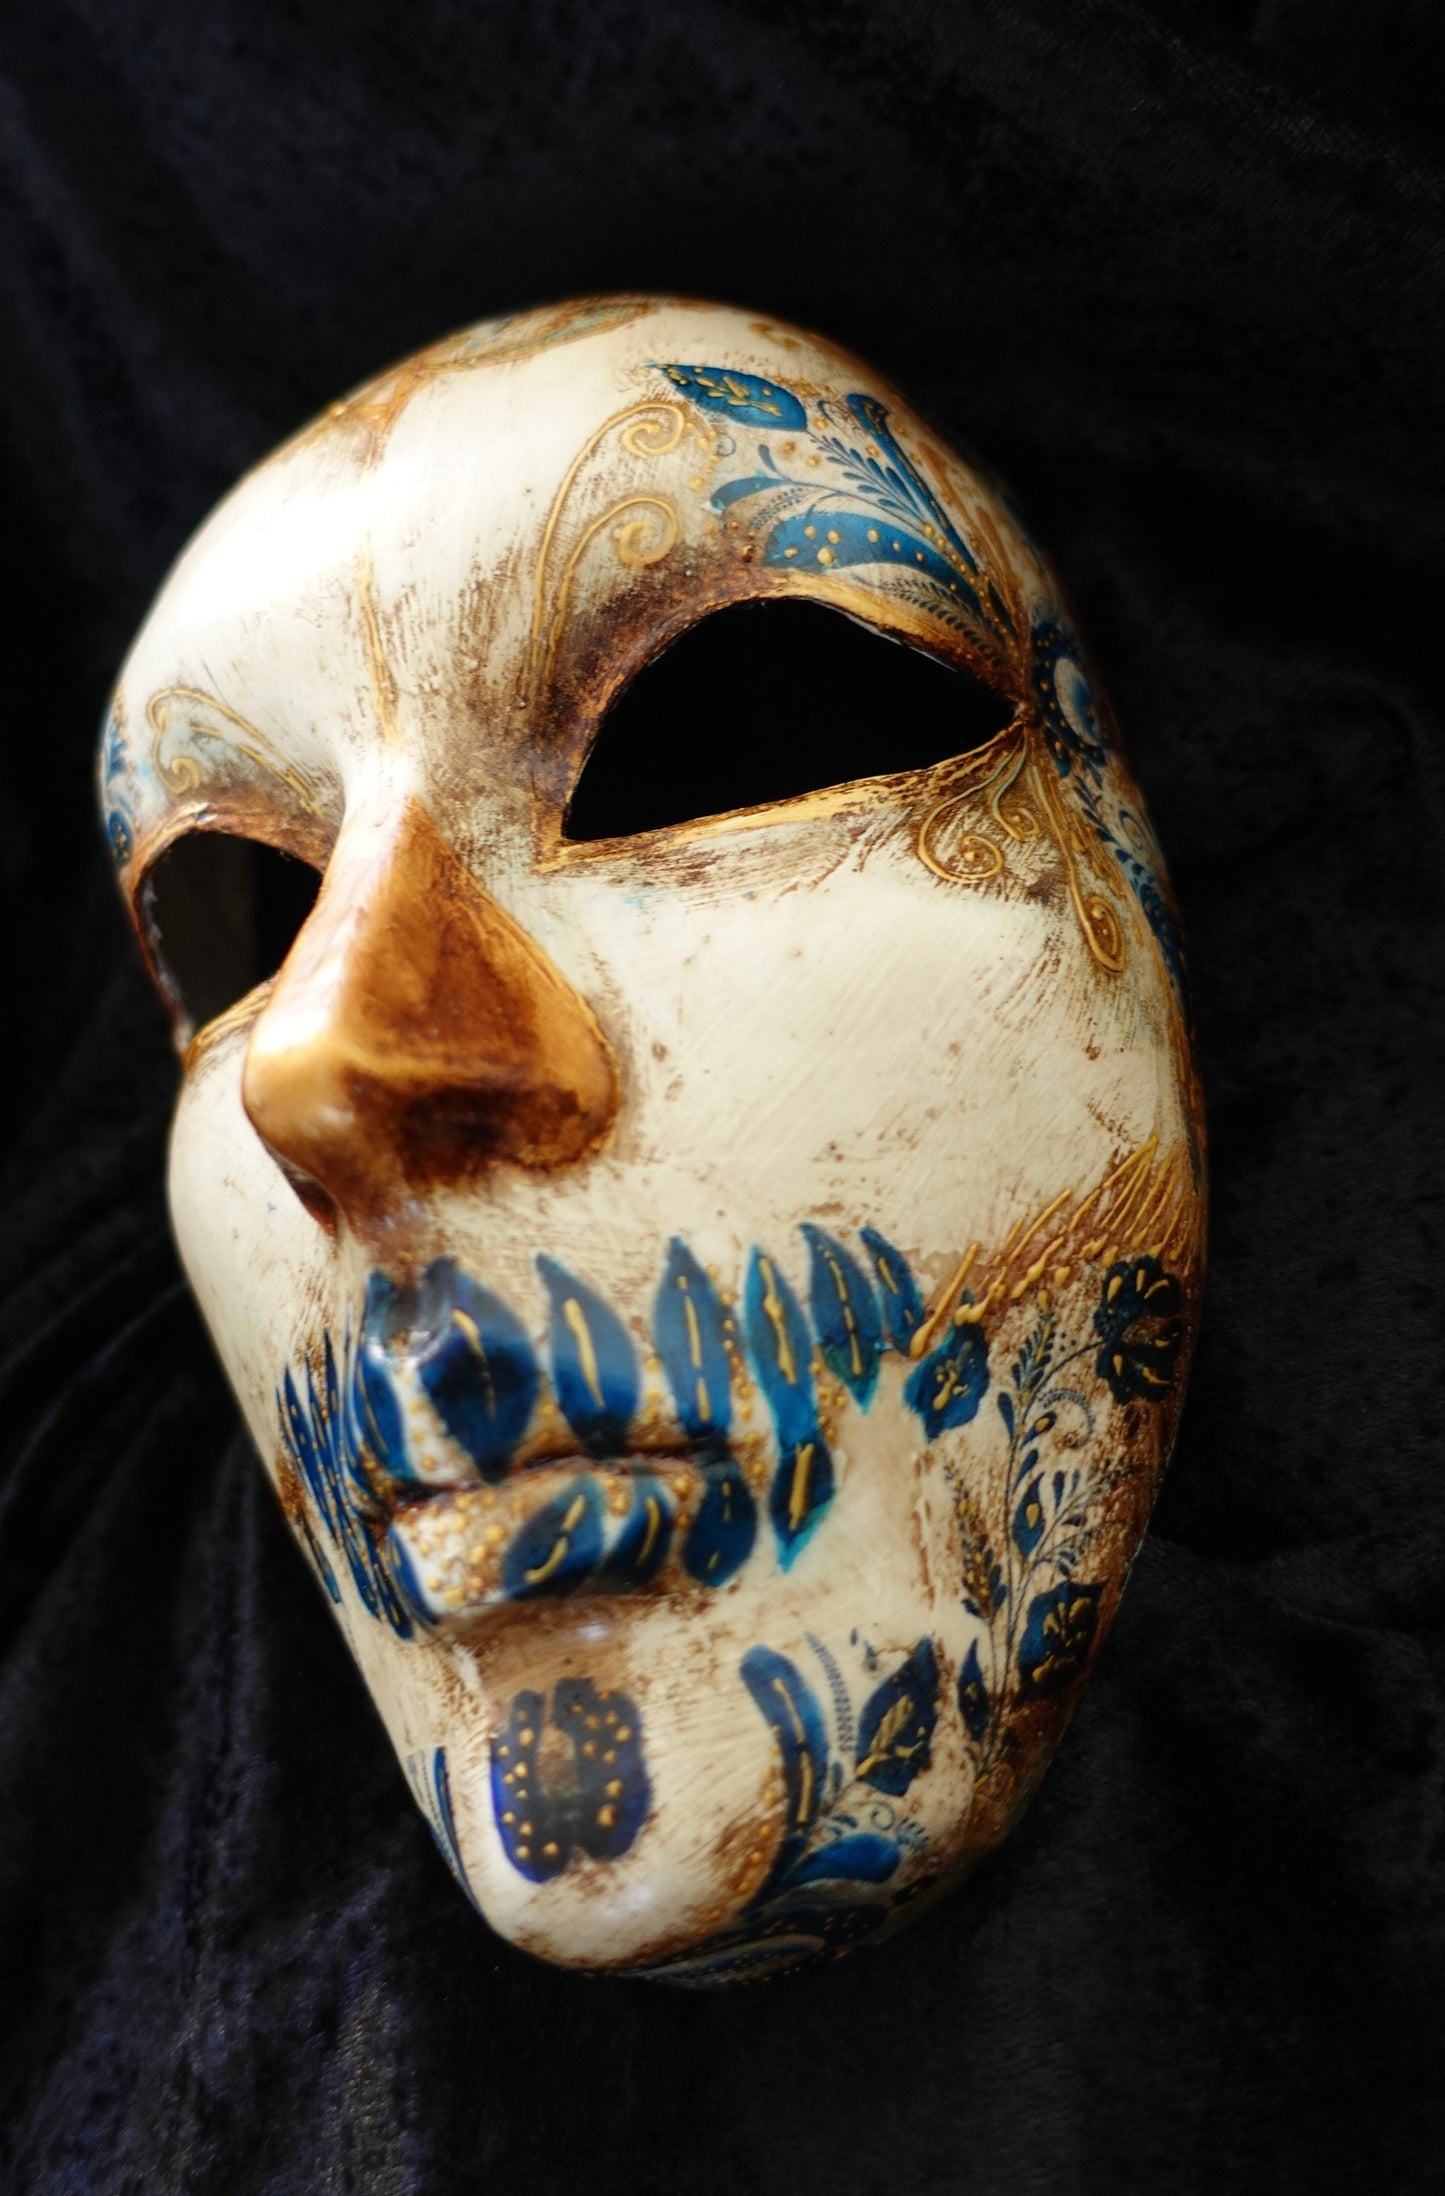 Day of the dead mask from Mexico day of the death original model